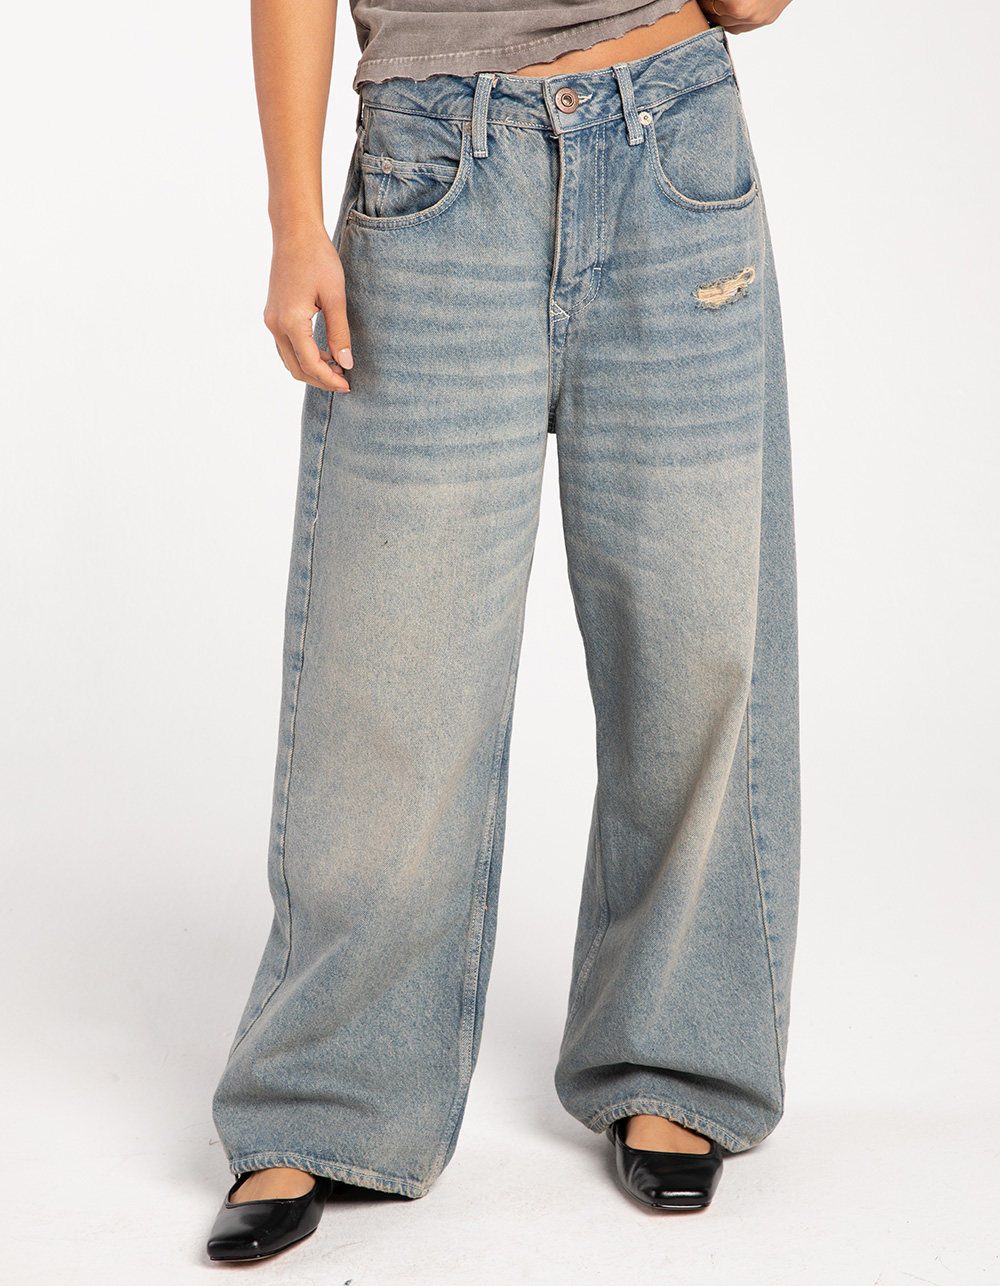 BDG Urban Outfitters Jaya Ultra Loose Womens Jeans